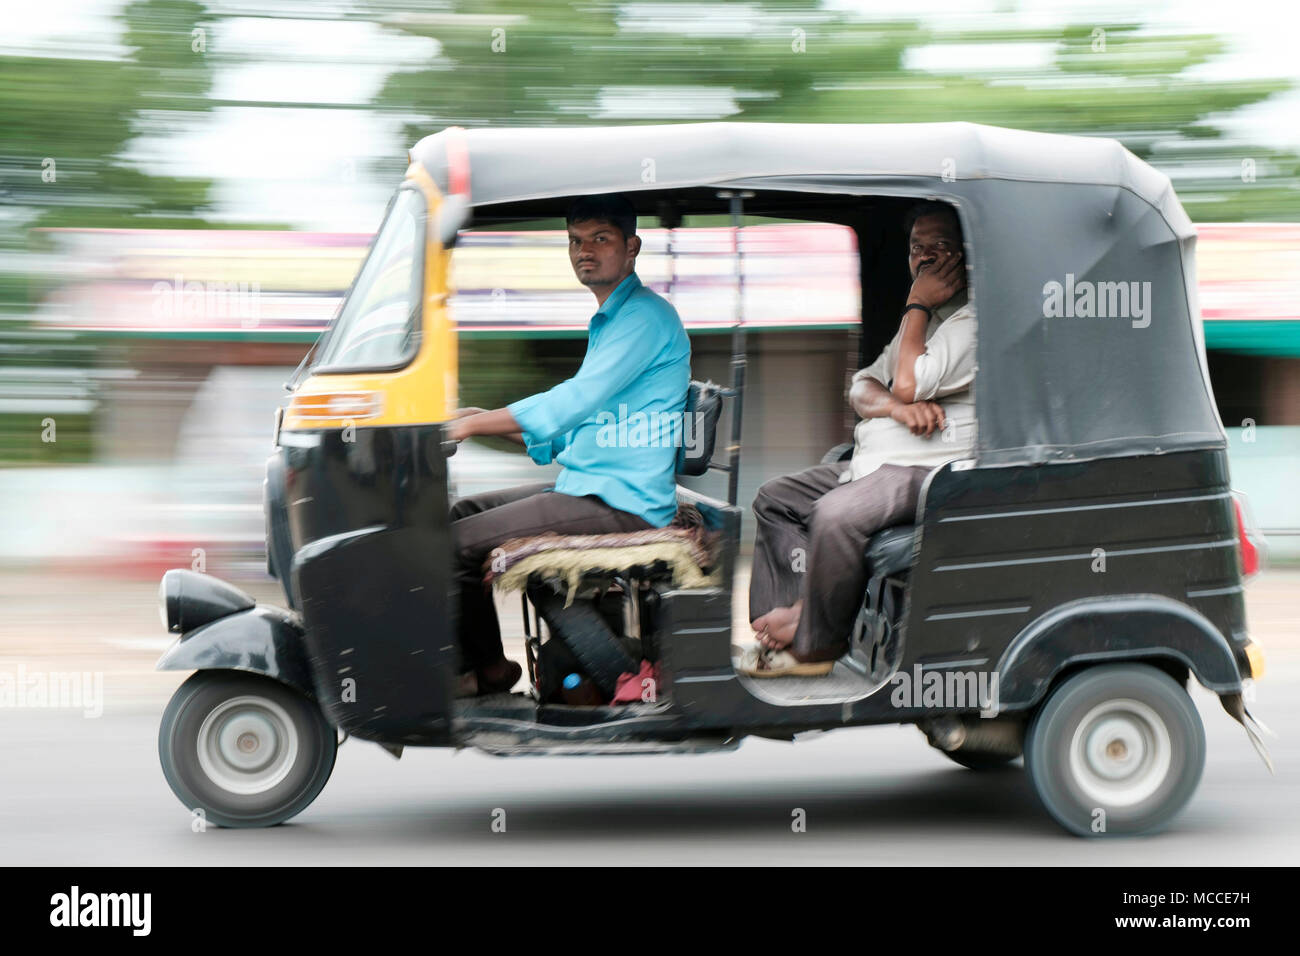 Bajaj Auto India High Resolution Stock Photography And Images Alamy